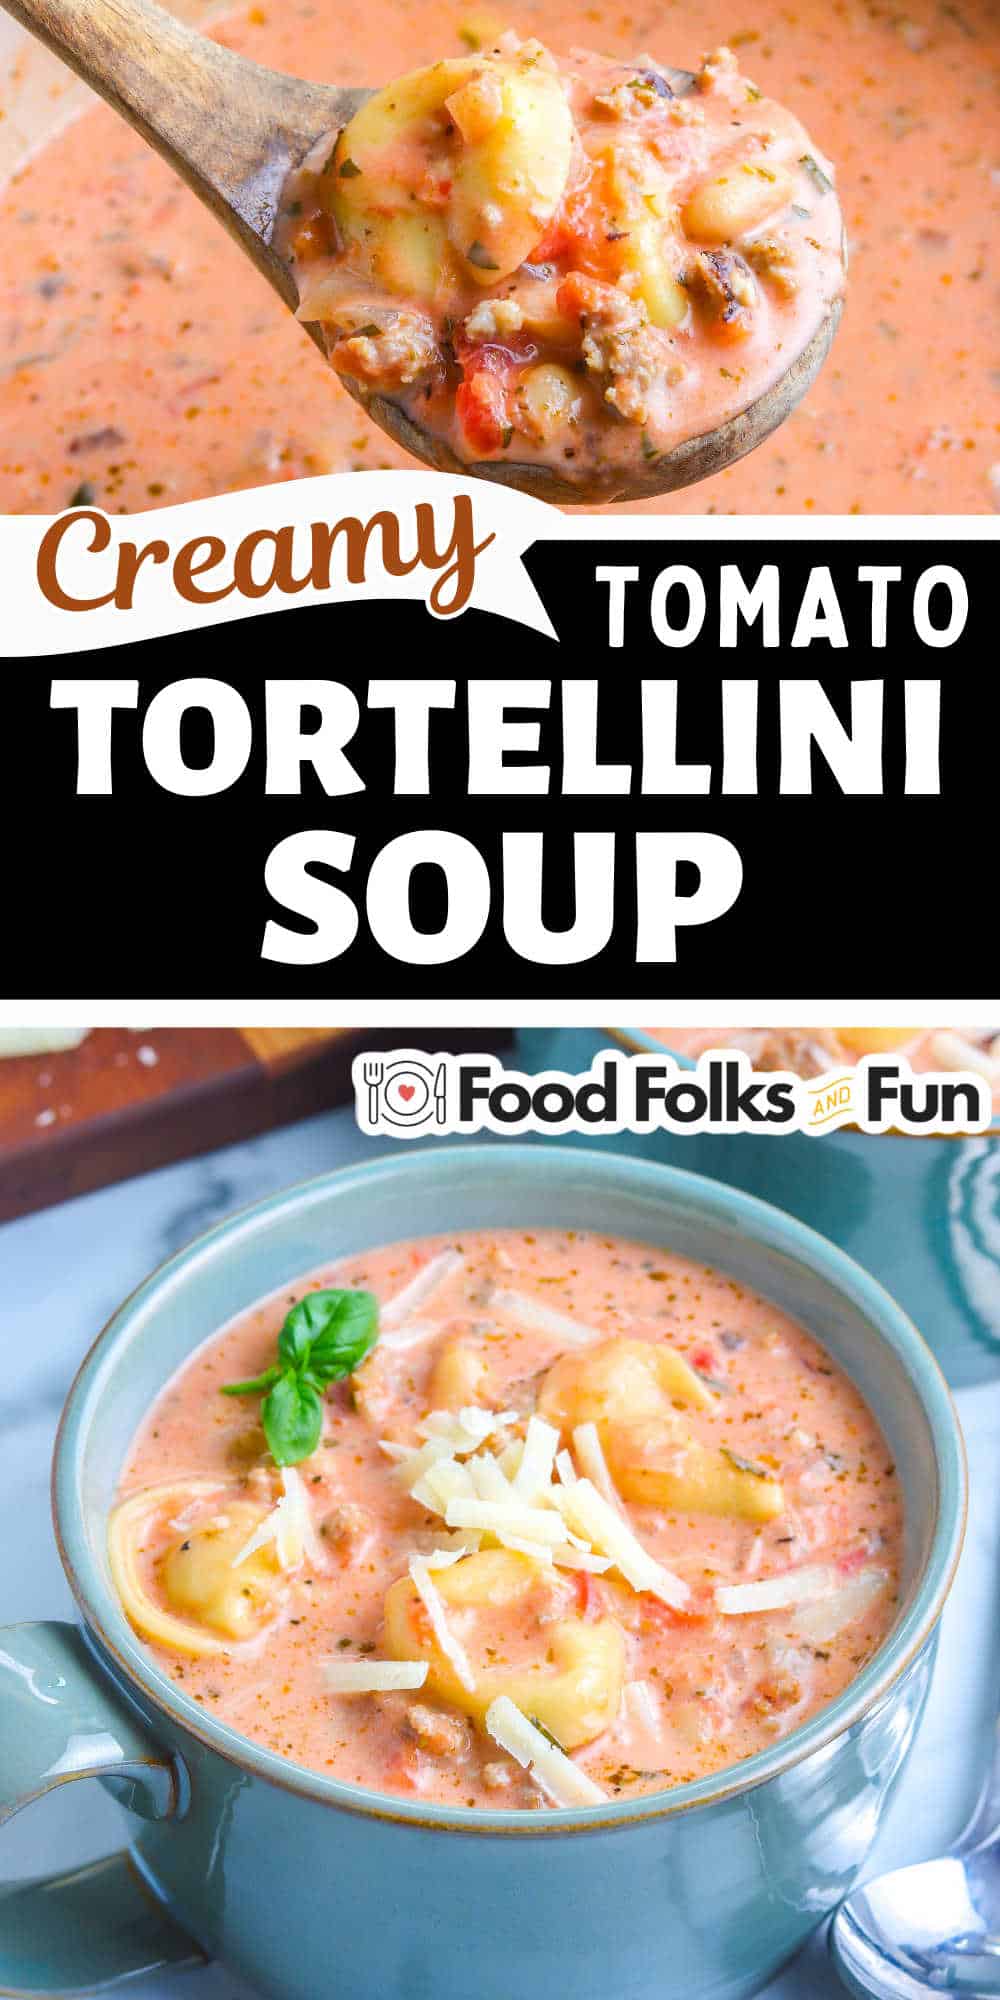 Craving creamy, dreamy comfort? This easy Creamy Tomato Tortellini Soup bursts with rich flavor and tender pasta. Whip it up in no time and enjoy warm bowls of family-favorite deliciousness! via @foodfolksandfun